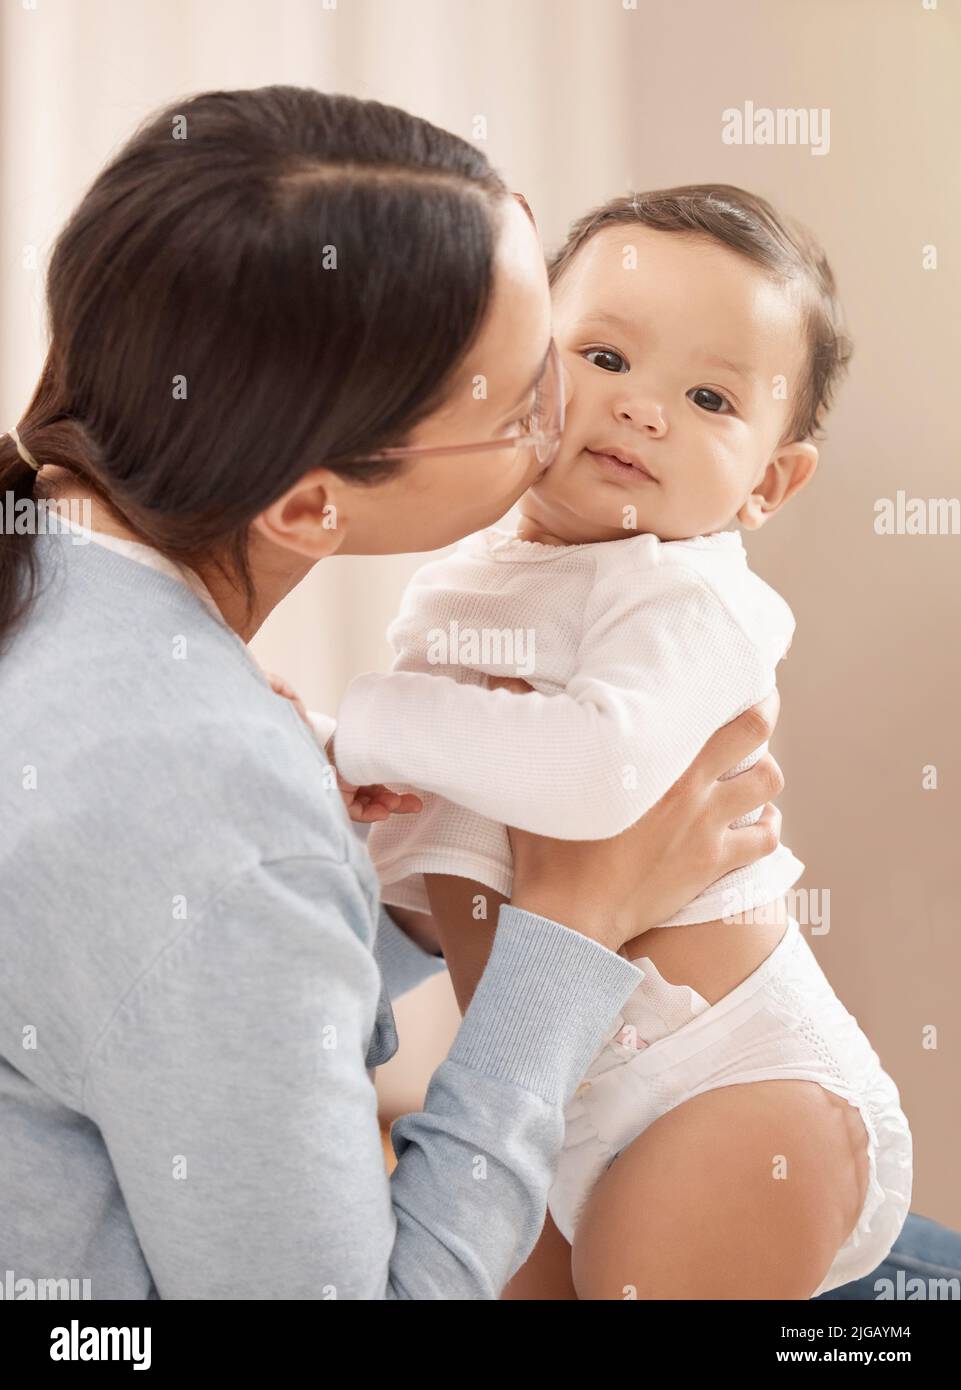 A whole lot of kisses make a happy baby. Portrait of an adorable baby girl being held and kissed by her mother at home. Stock Photo